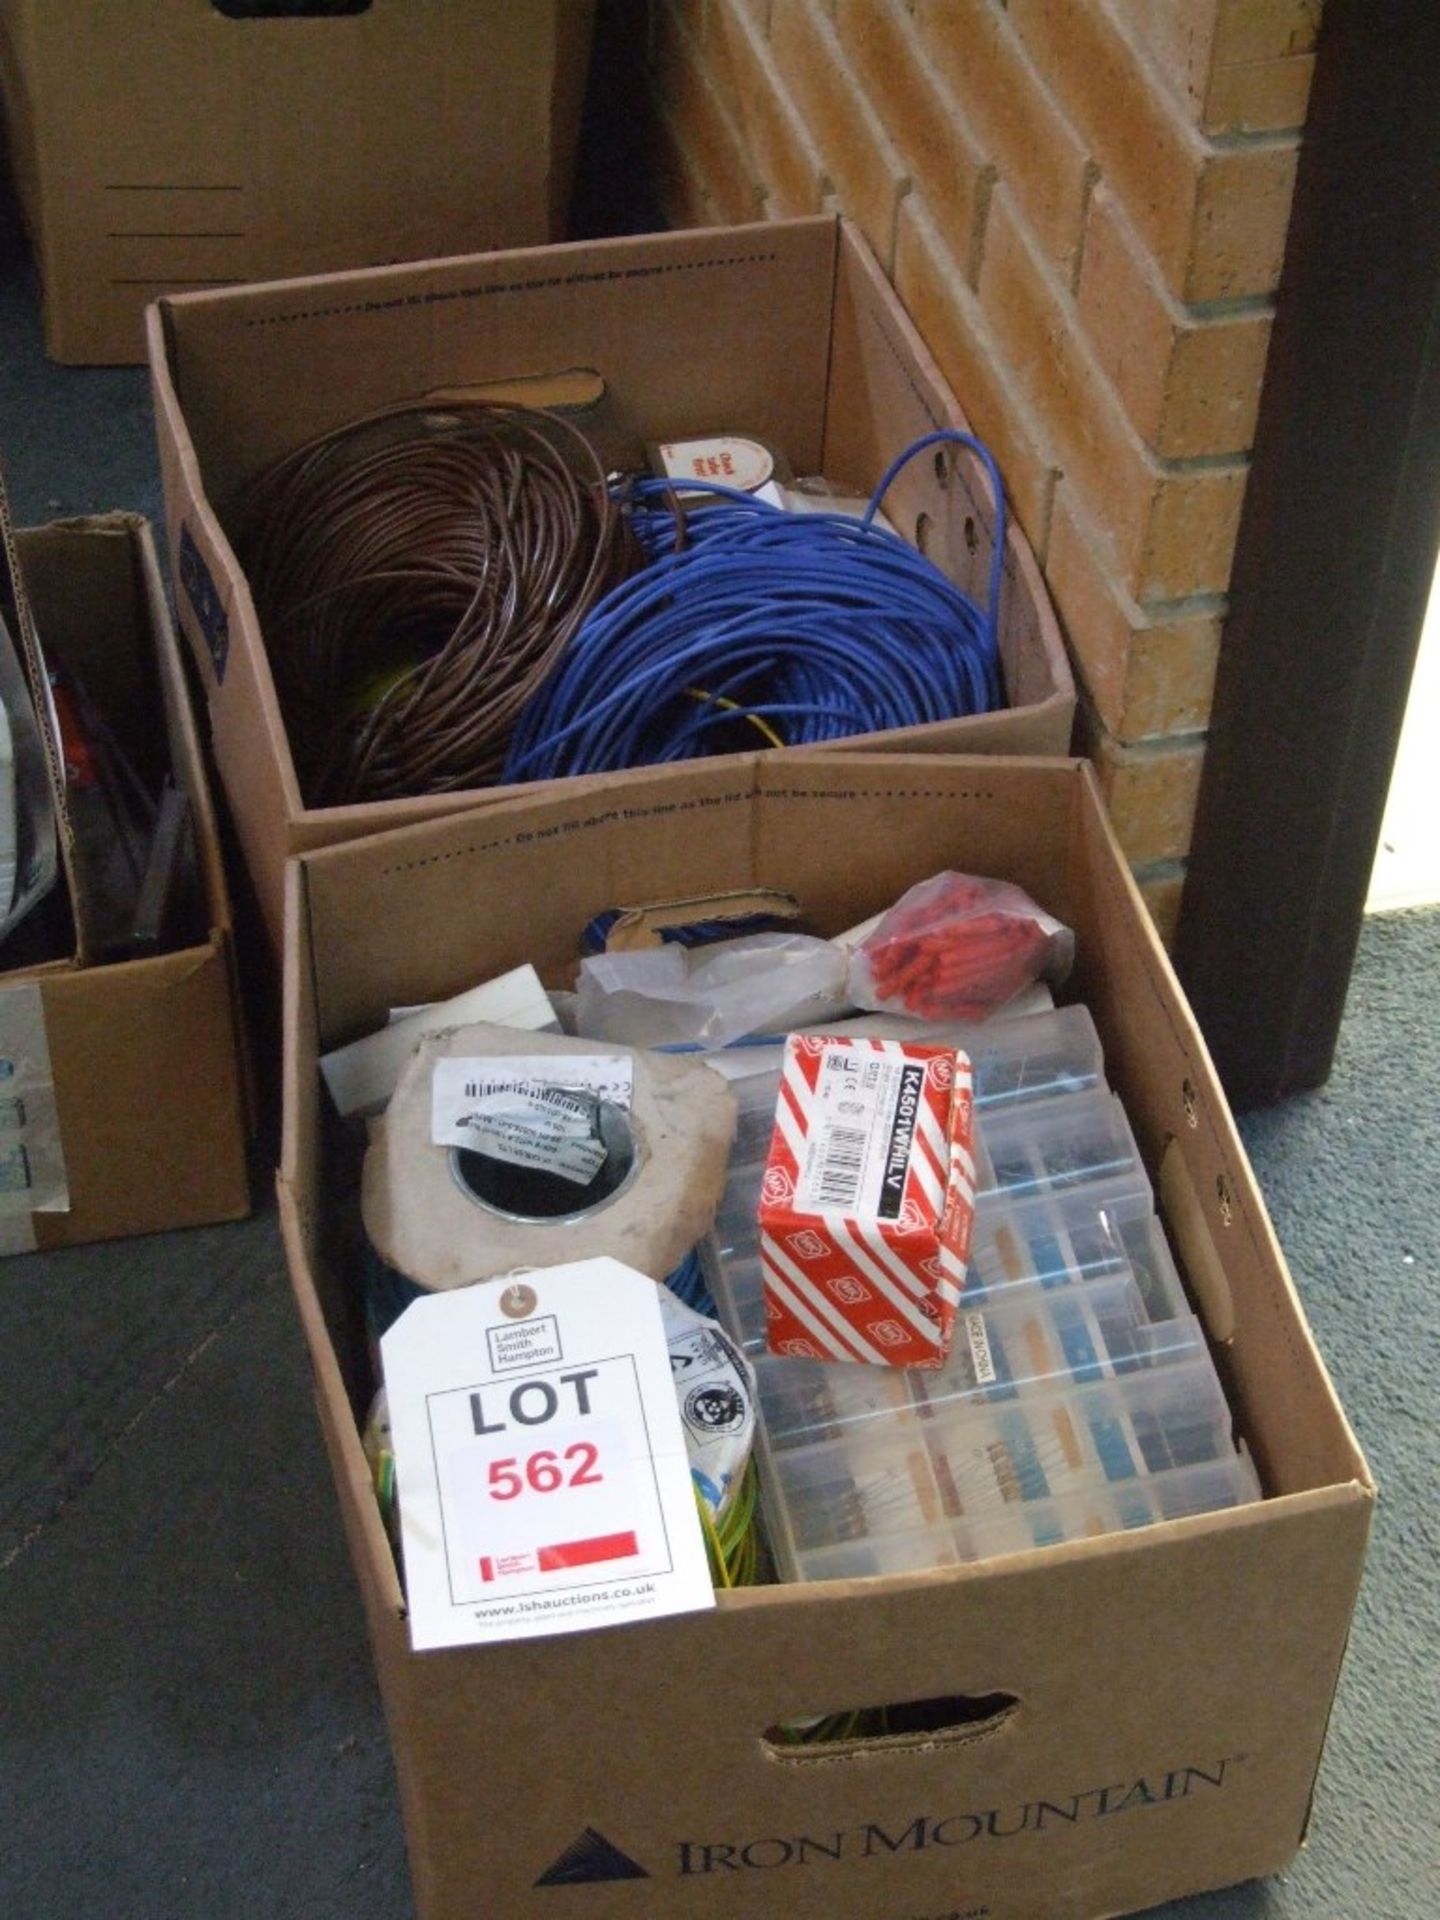 2 boxes of various electrical components to include wire, resisitors, sockets etc.